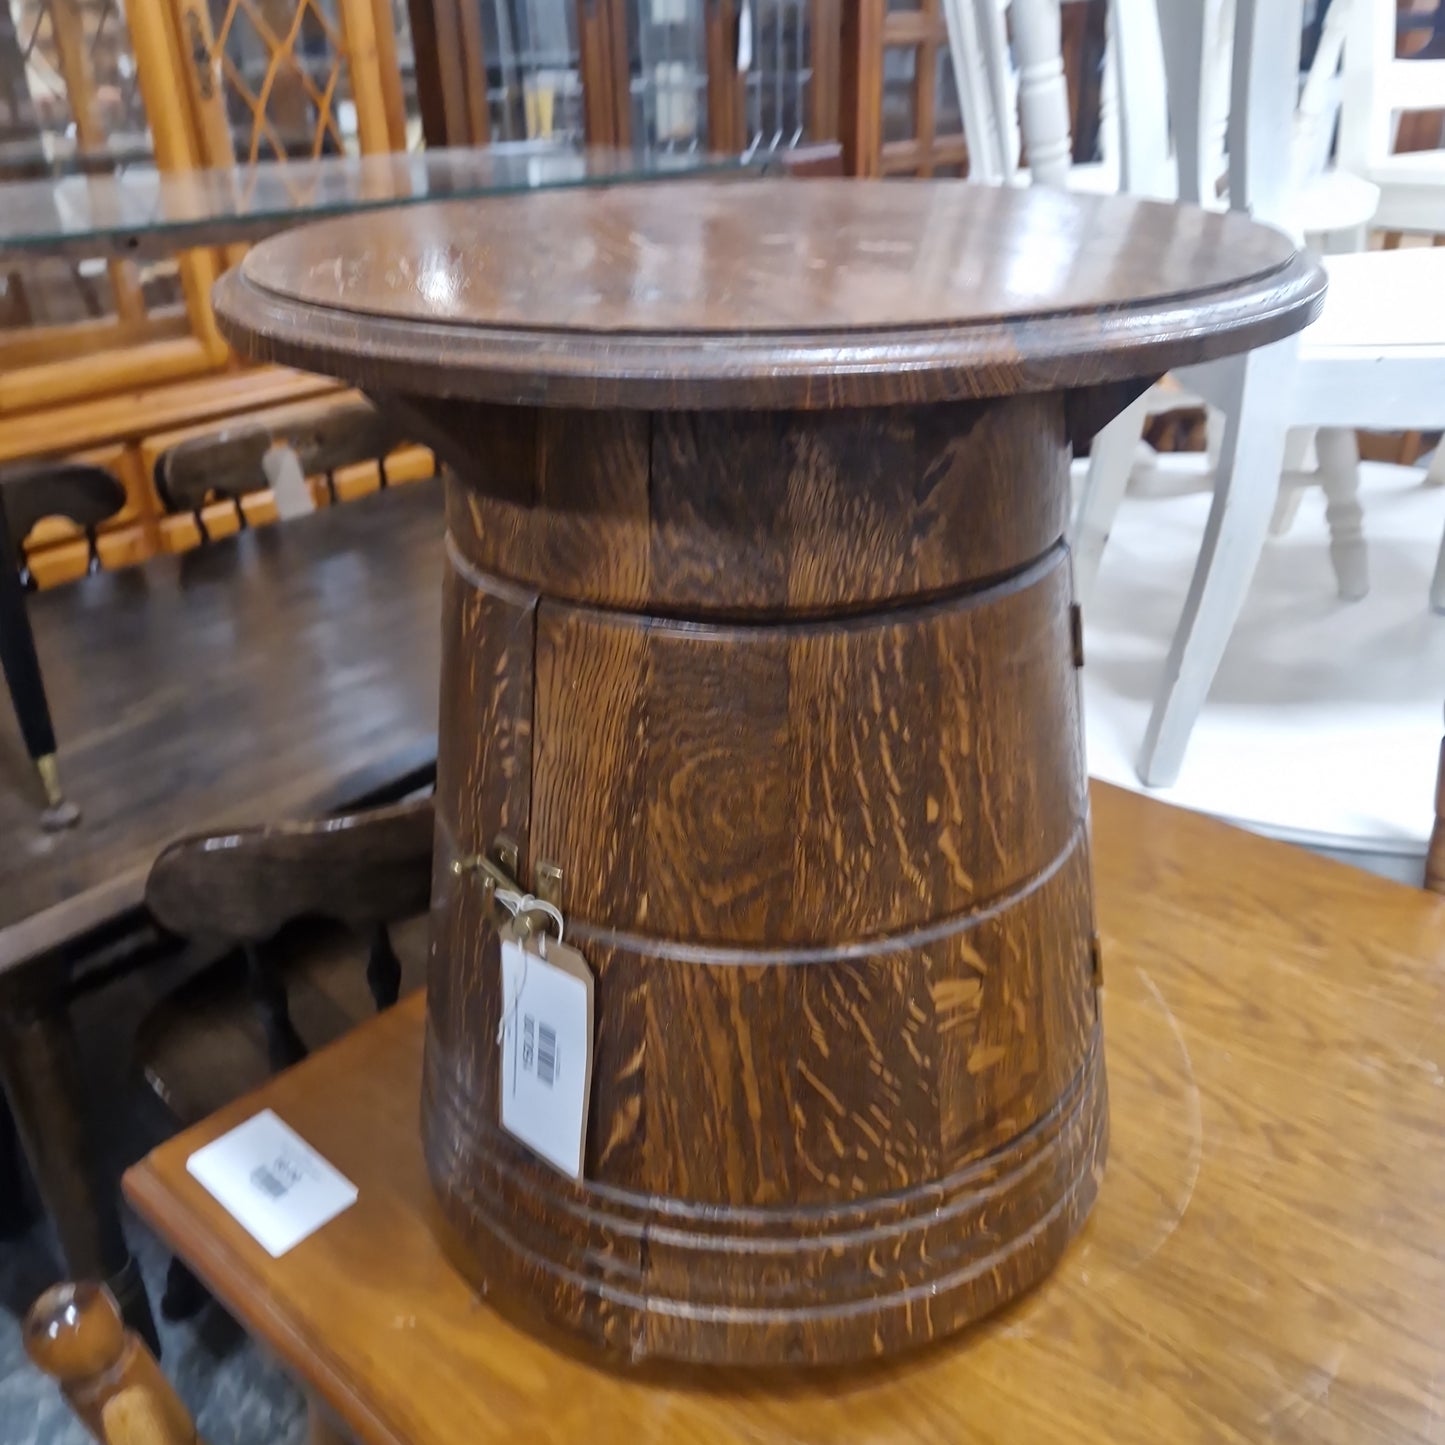 Solid oak stained circular drinks cabinet